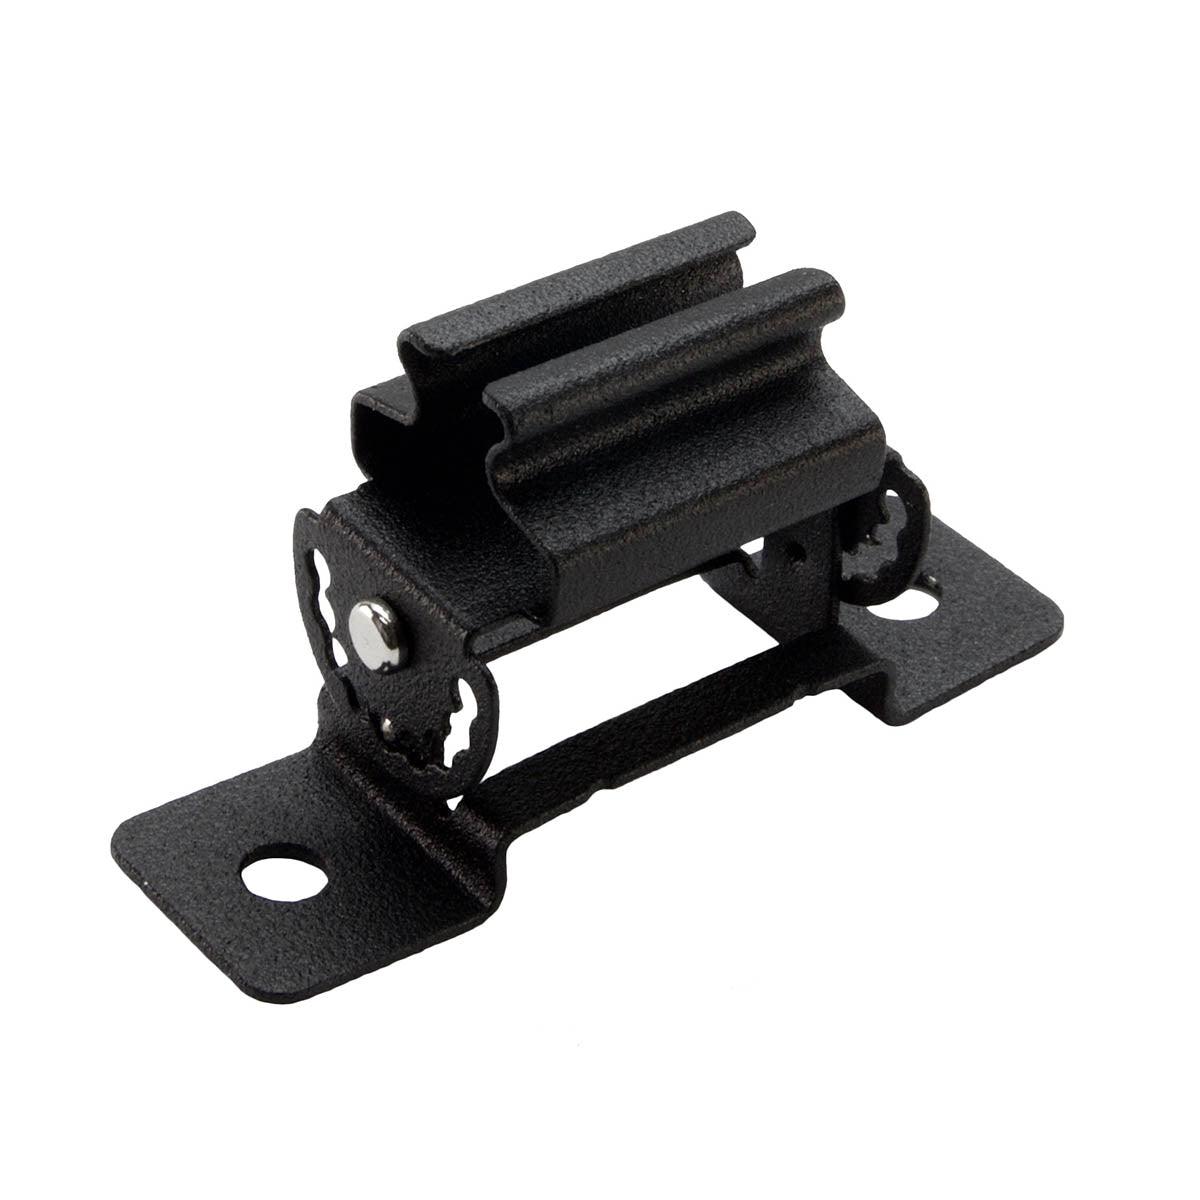 Black Rotating Mounting Clips for Square, 45°, and DUO Channels, Pack of 2 - Bees Lighting